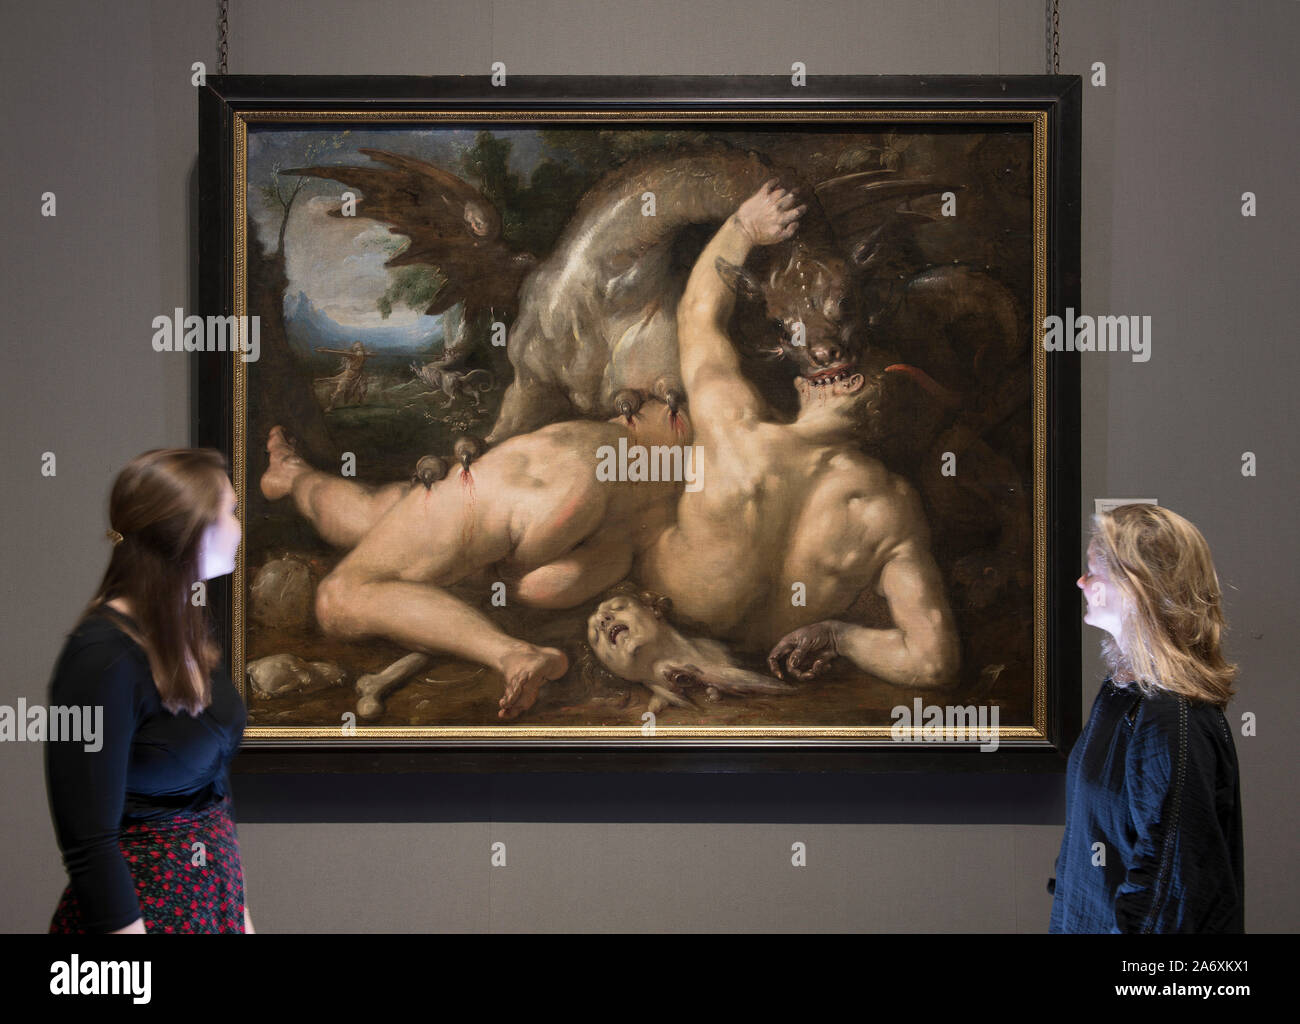 National Gallery, London, UK. 17th October 2019.  Photo embargoed until 29th October 2019. The National Gallery choose two pictures with a spooky horror Halloween theme for the 31st October, posed with members of staff. Image: Two Followers of Cadmus devoured by a Dragon. Cornelius van Haarlem, 1588. The National Gallery, London. Credit: Malcolm Park/Alamy Live News. Stock Photo